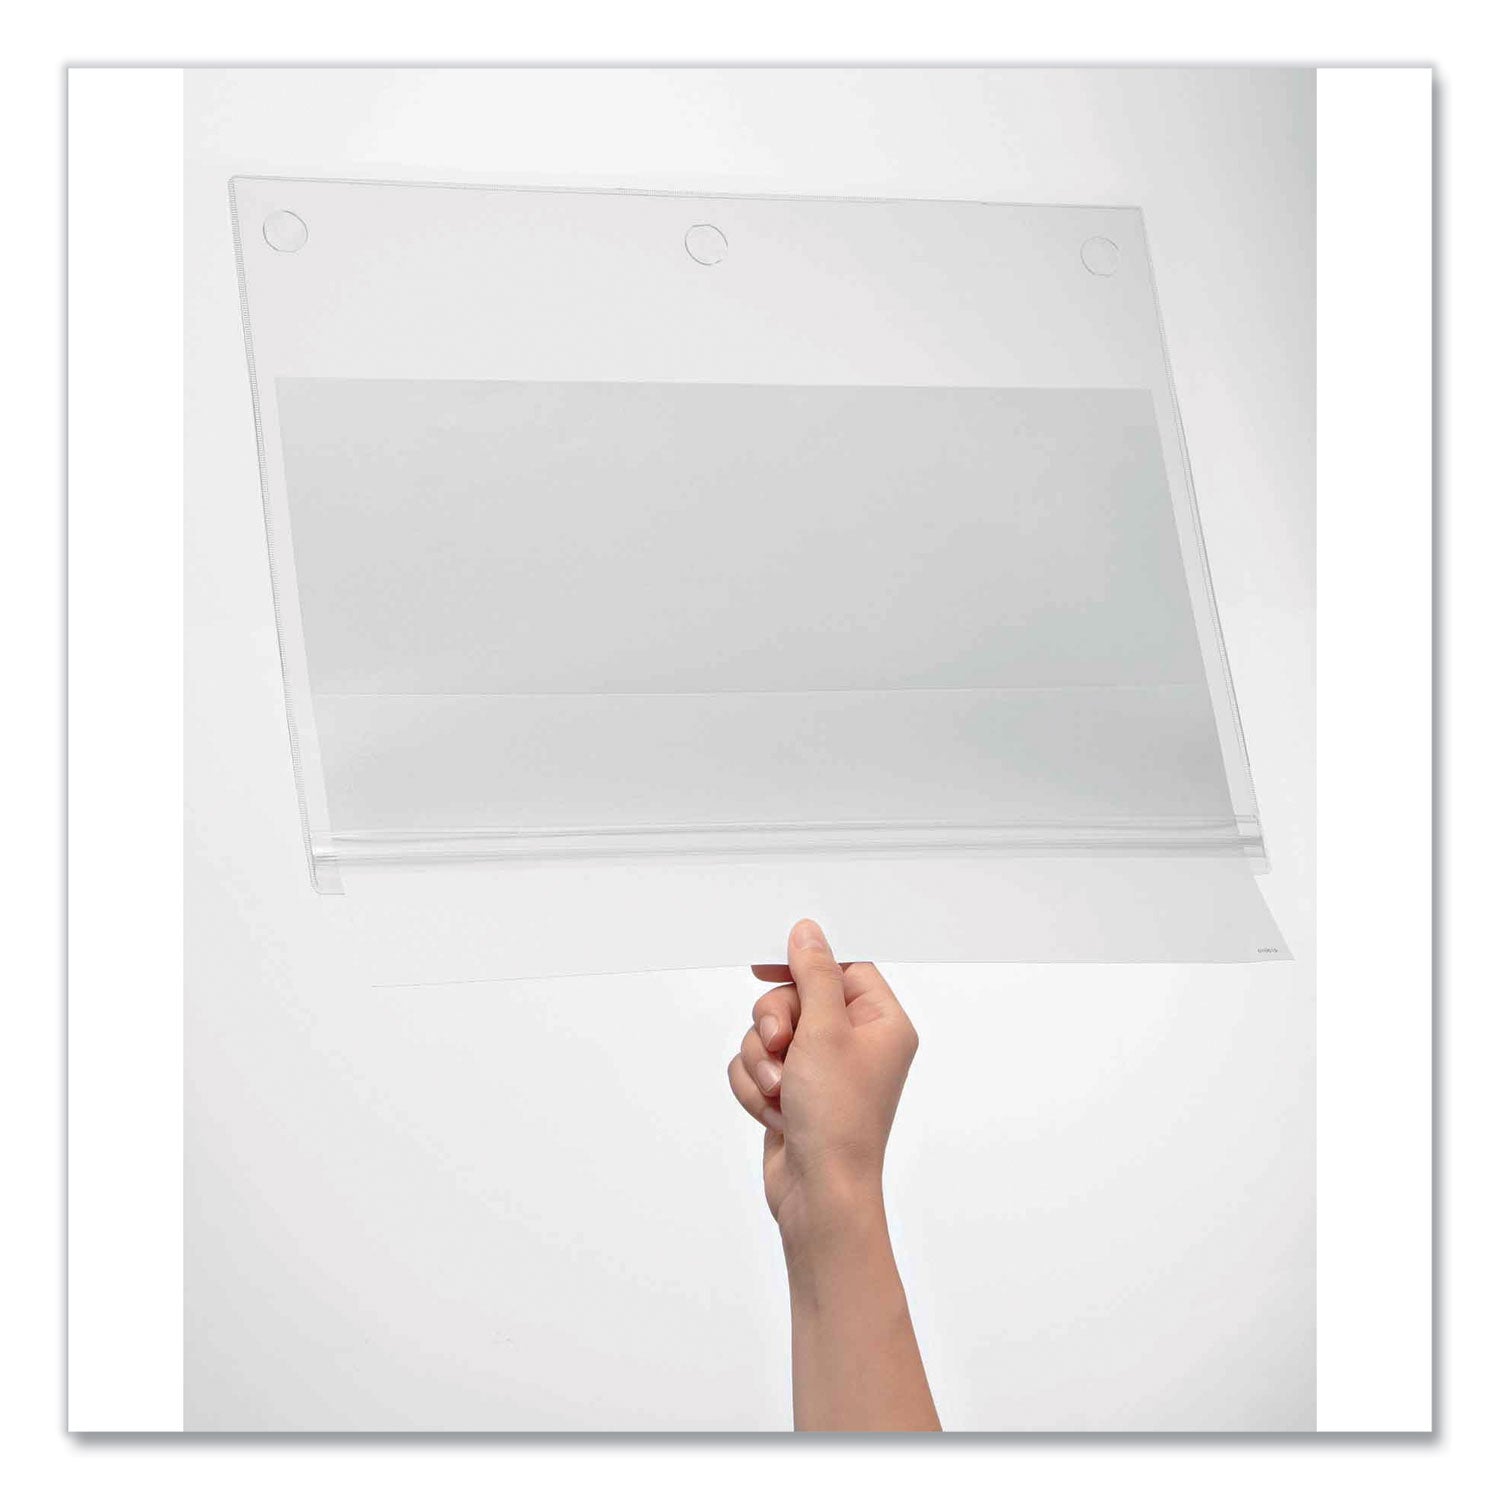 self-adhesive-water-resistant-sign-holder-11-x-17-clear-frame-5-pack_dbl501719 - 4